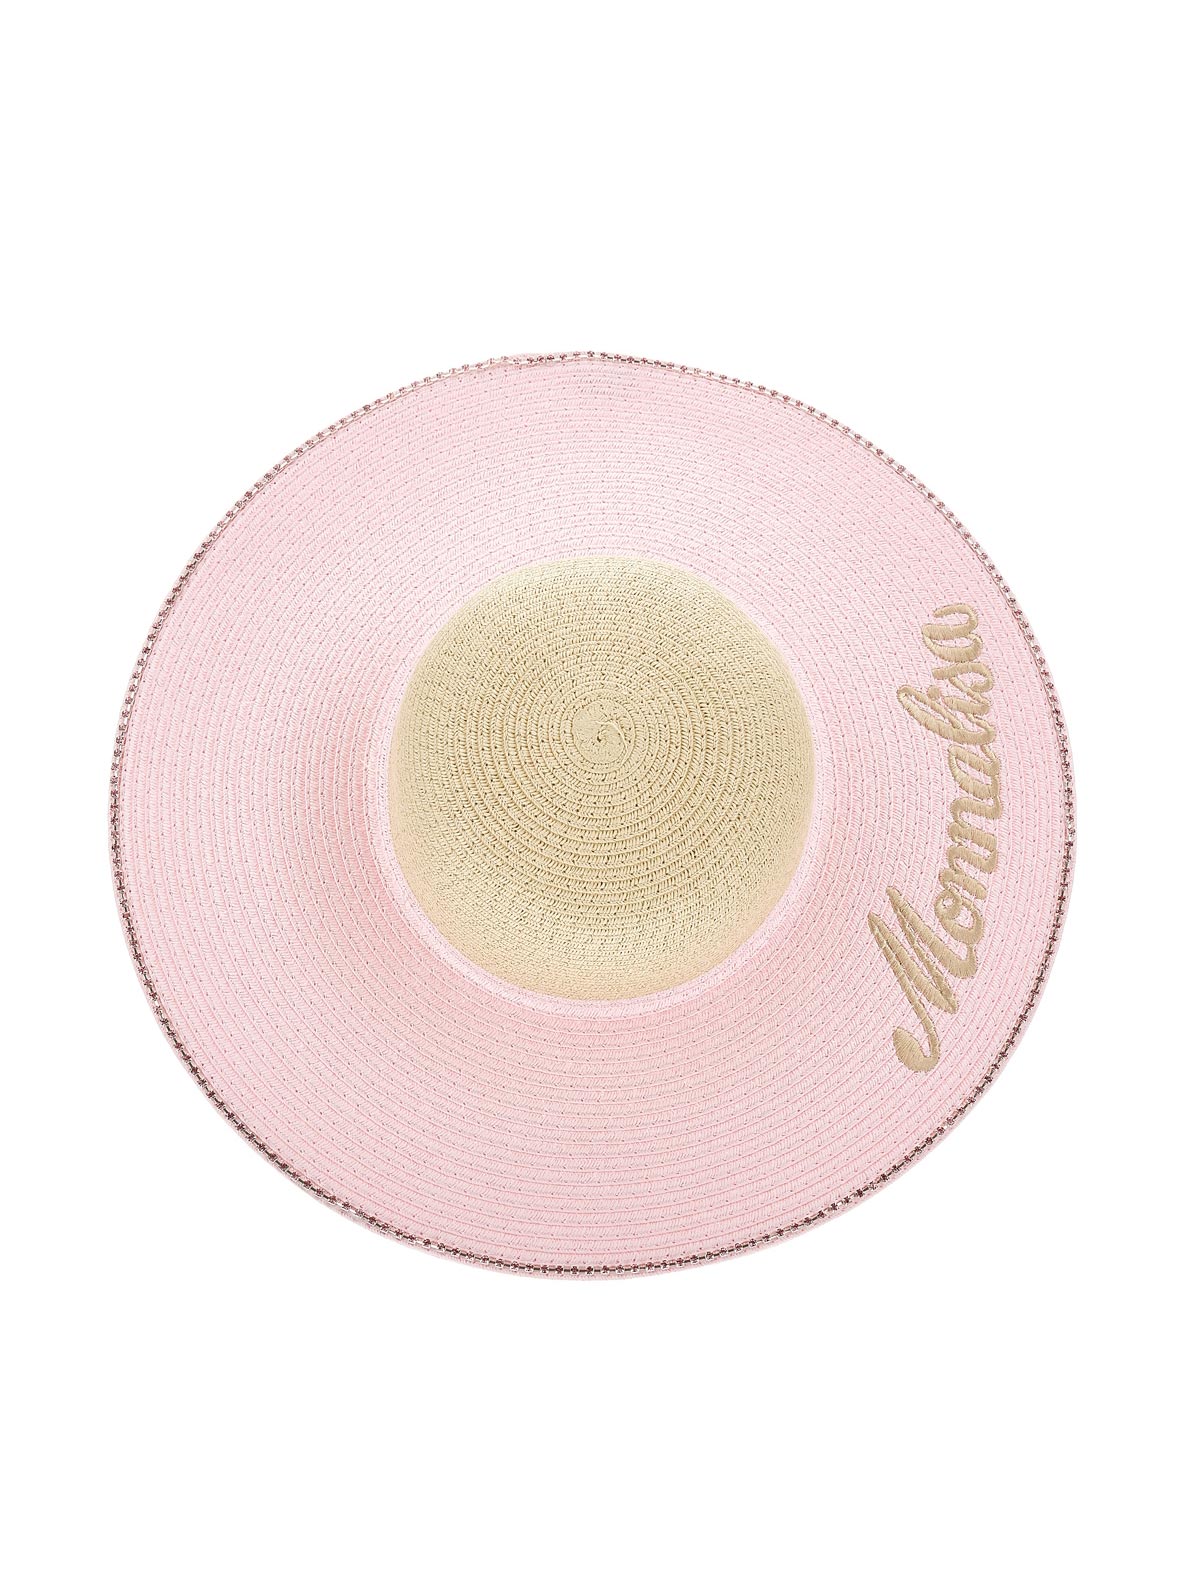 Monnalisa Hat with embroidered logo-17C064